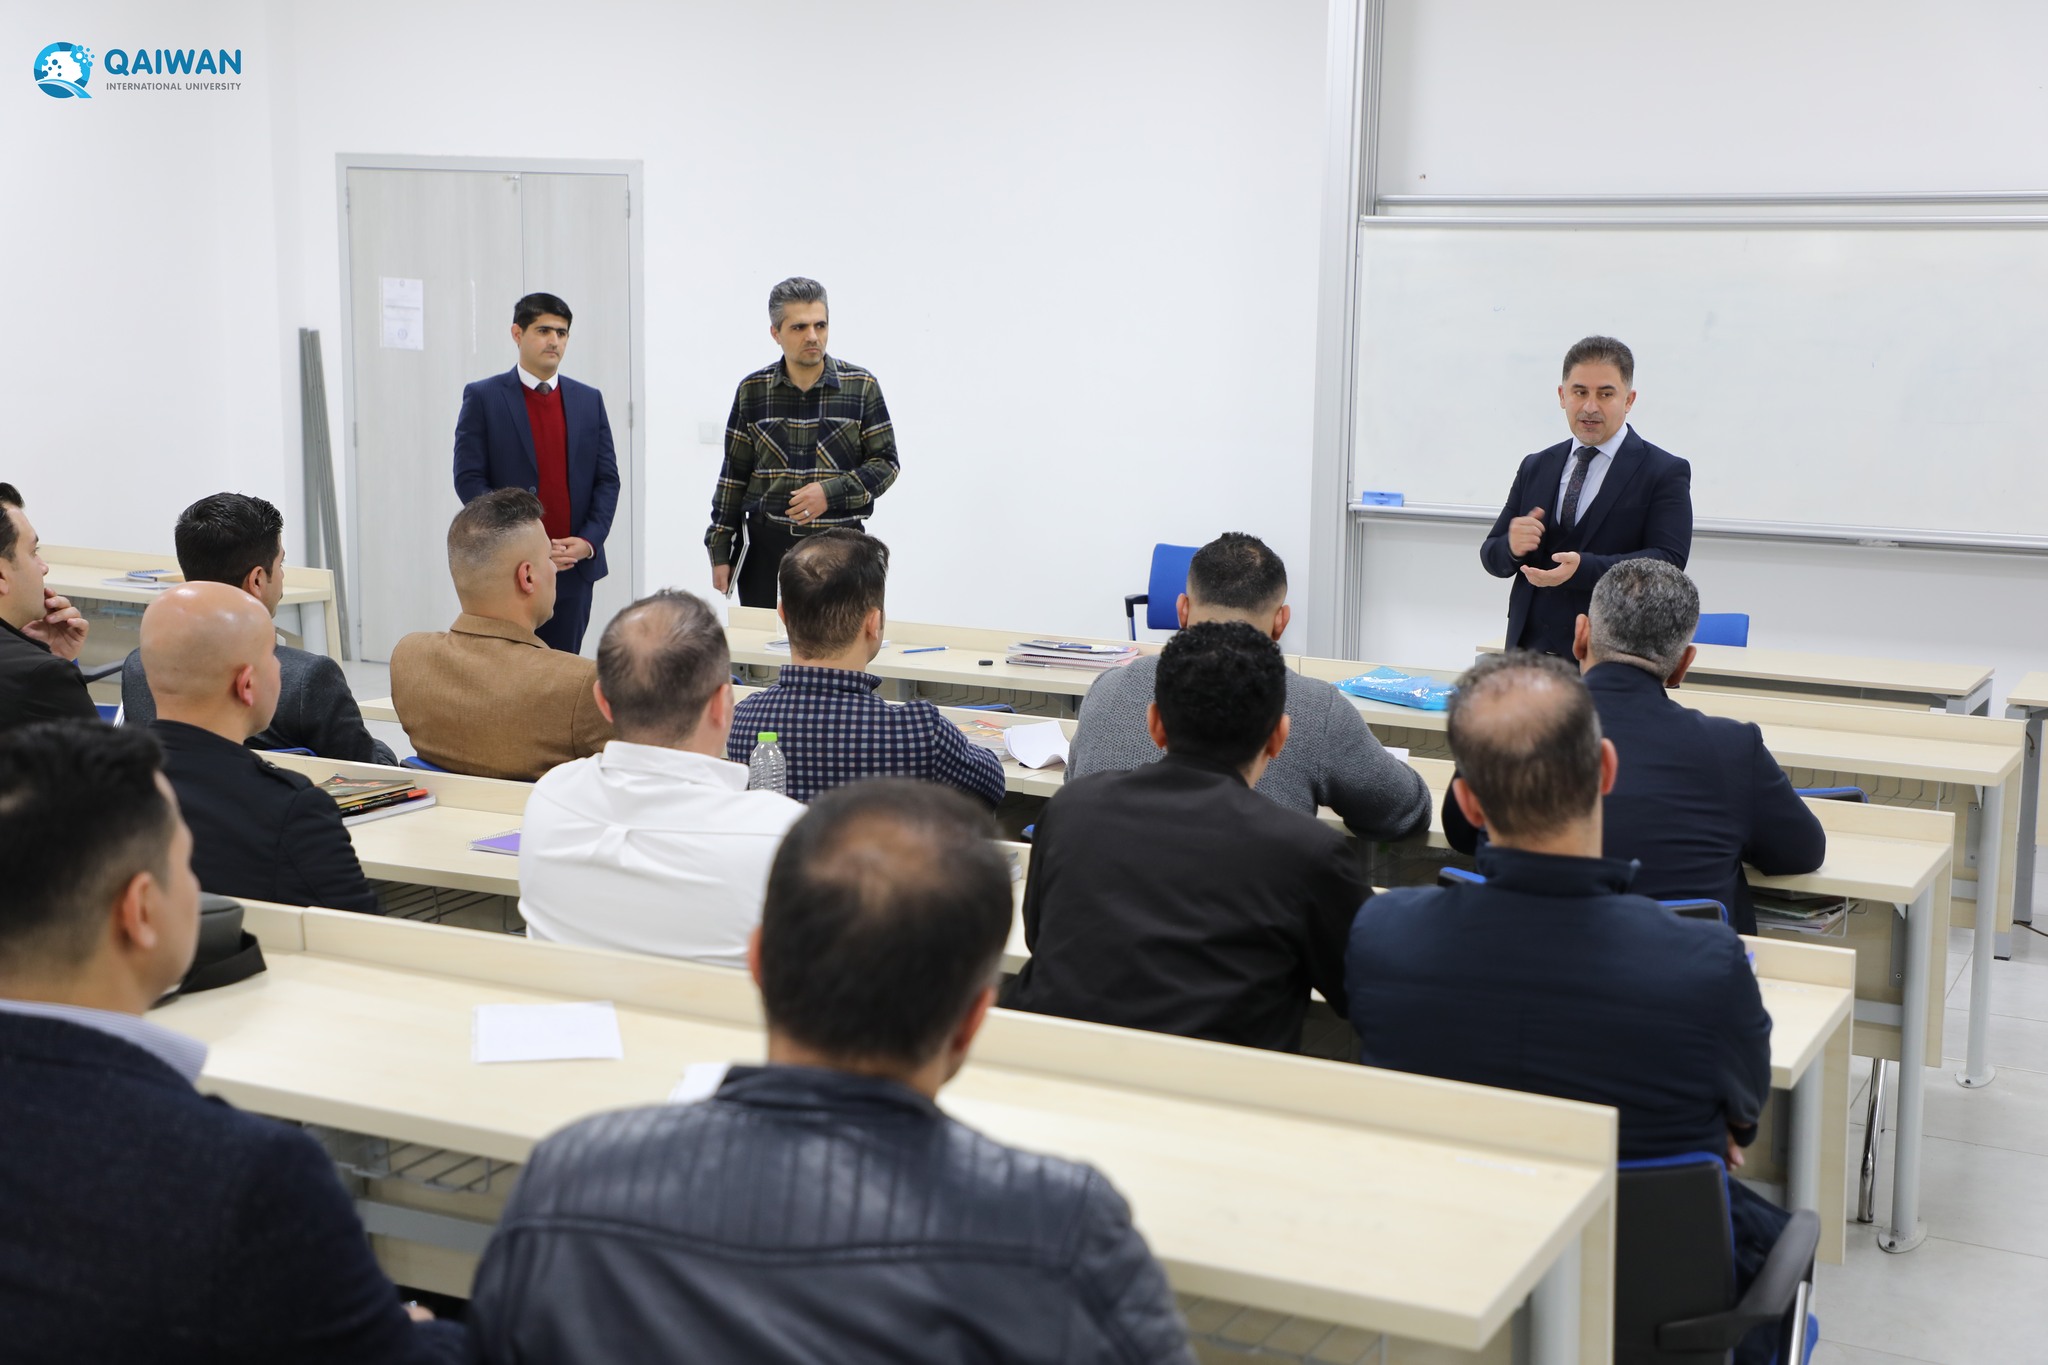 The Training and Development Center (TDC) at QIU is opening a training course on cyber crime investigation for officers and employees of the Sulaimani Police Directorate